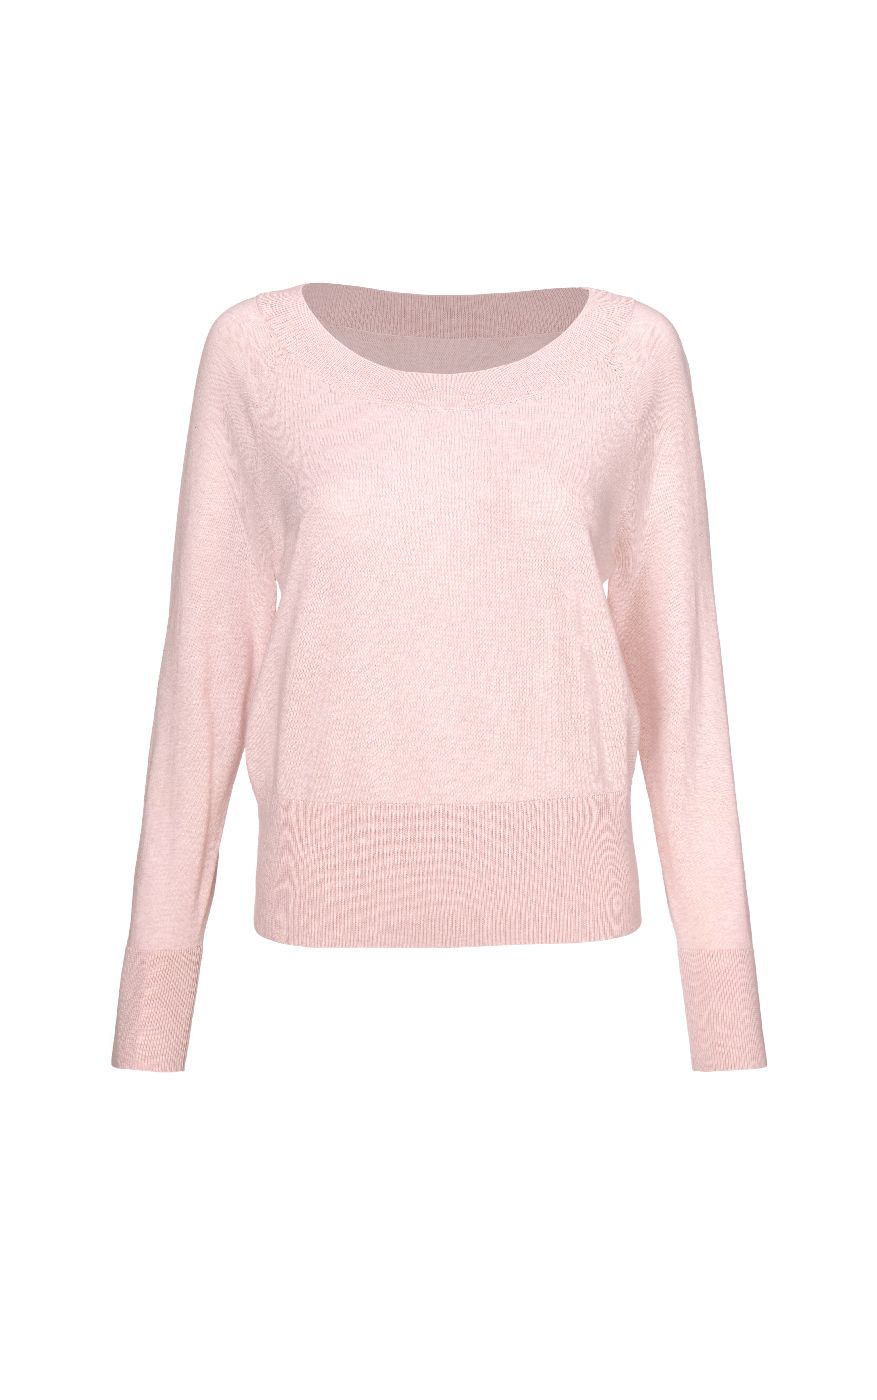 Ballet Sweater - cabi Spring 2023 Collection | cabi